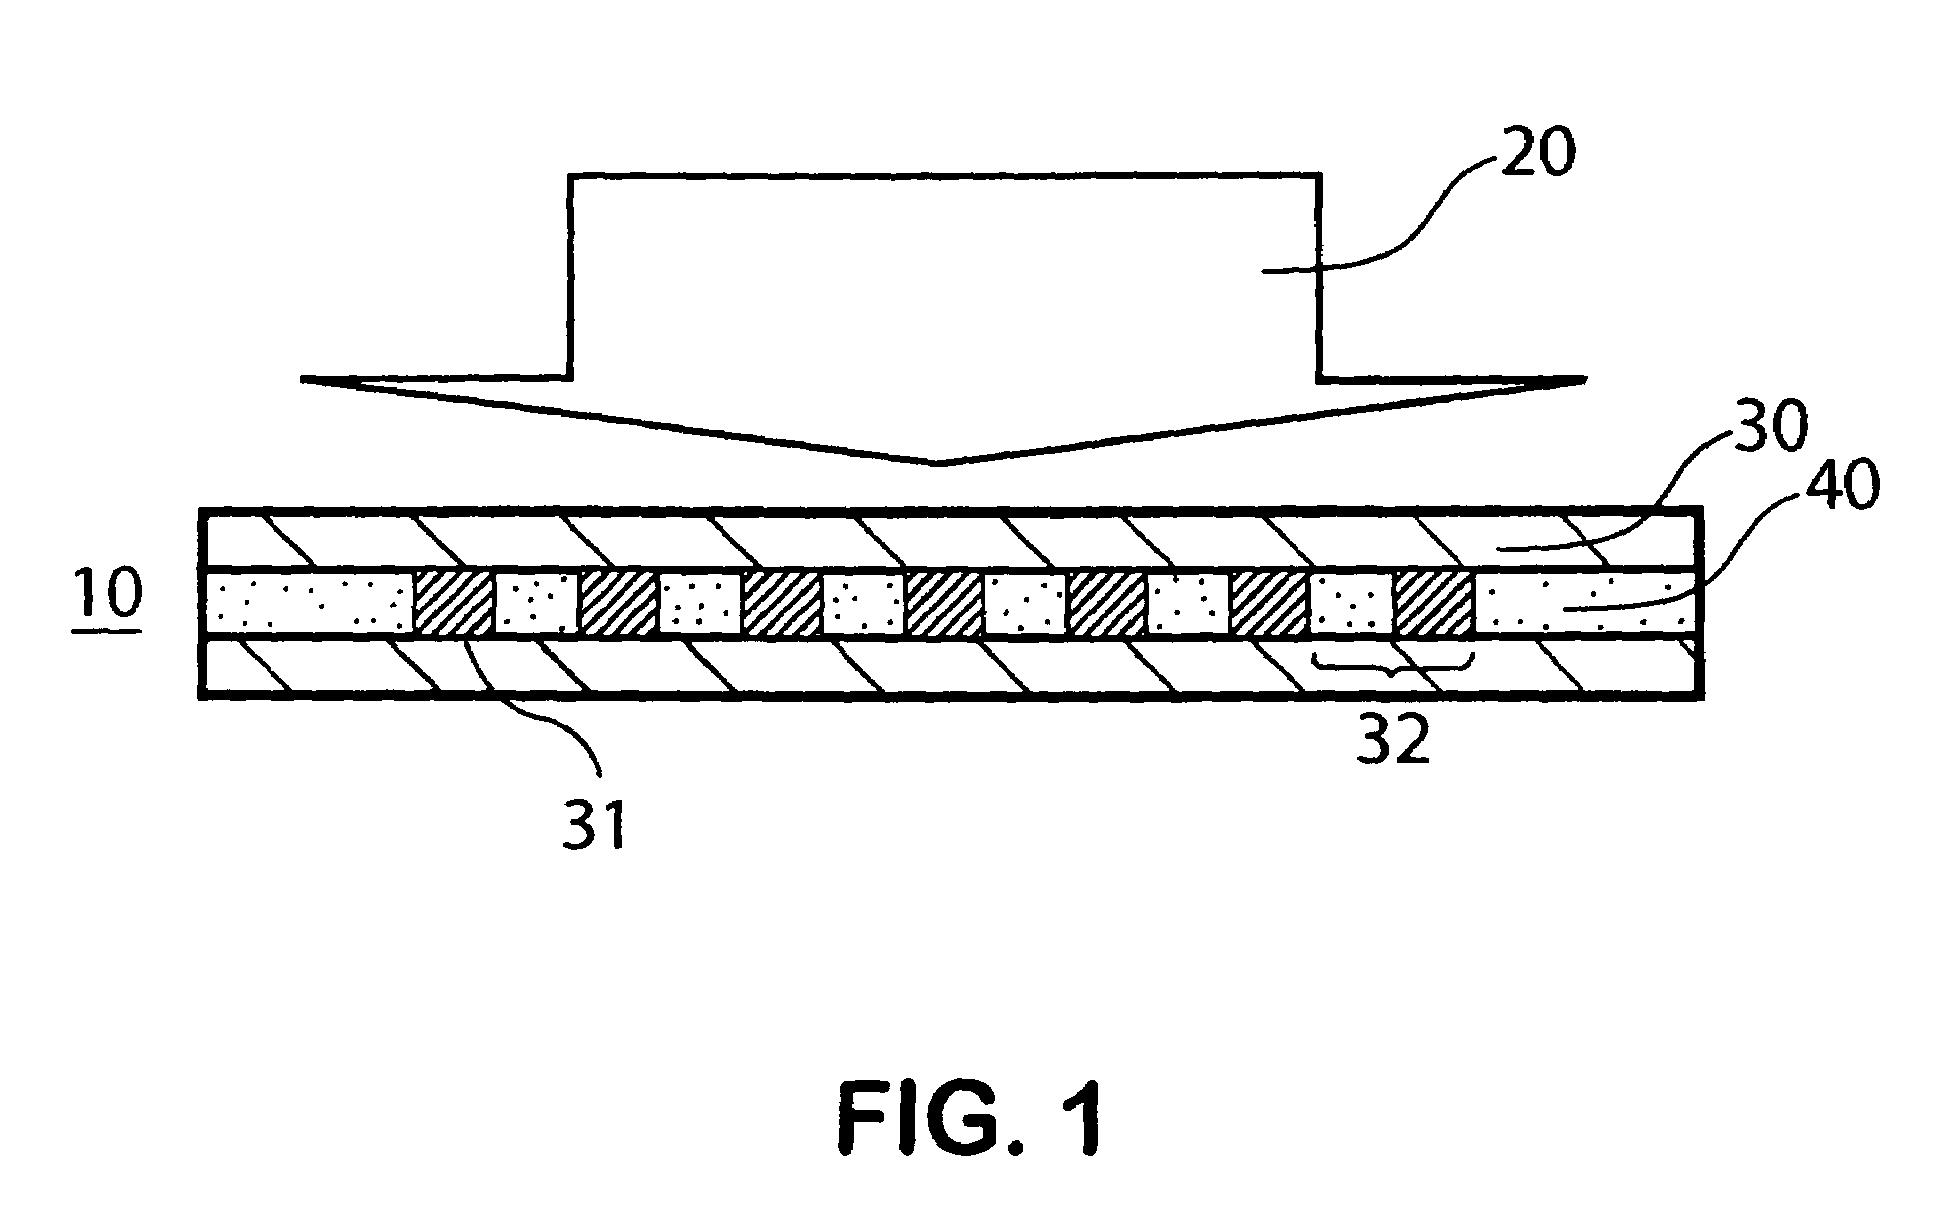 Optical apparatus for detecting and treating vulnerable plaque